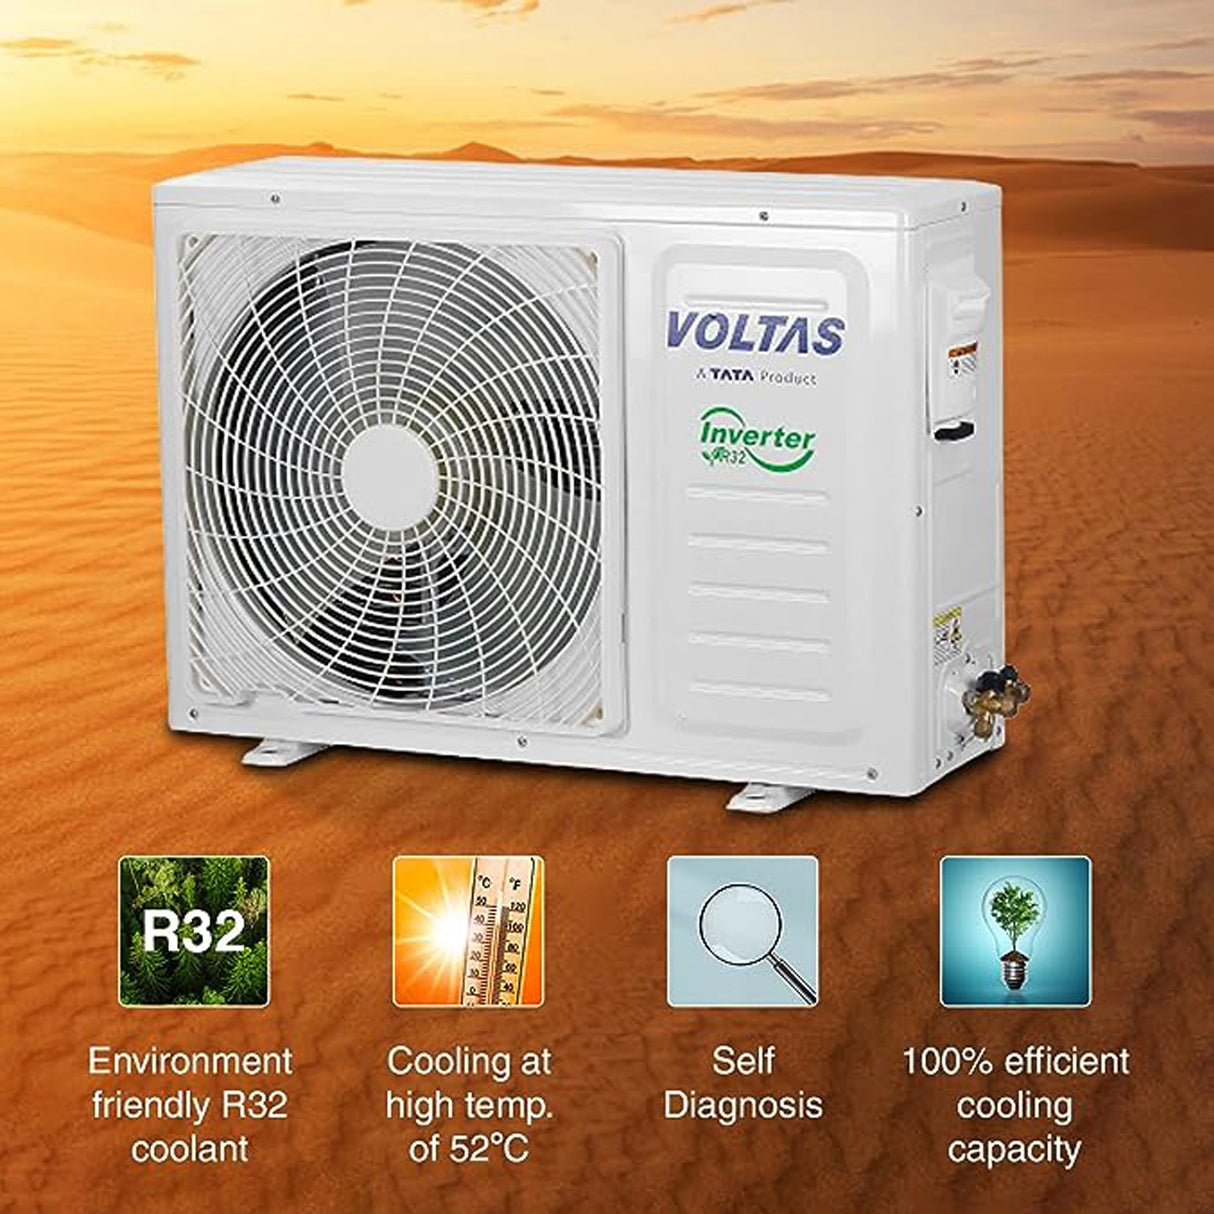 Ultimate Comfort: Top-rated Voltas 1.5 Ton AC with 3-Star Rating